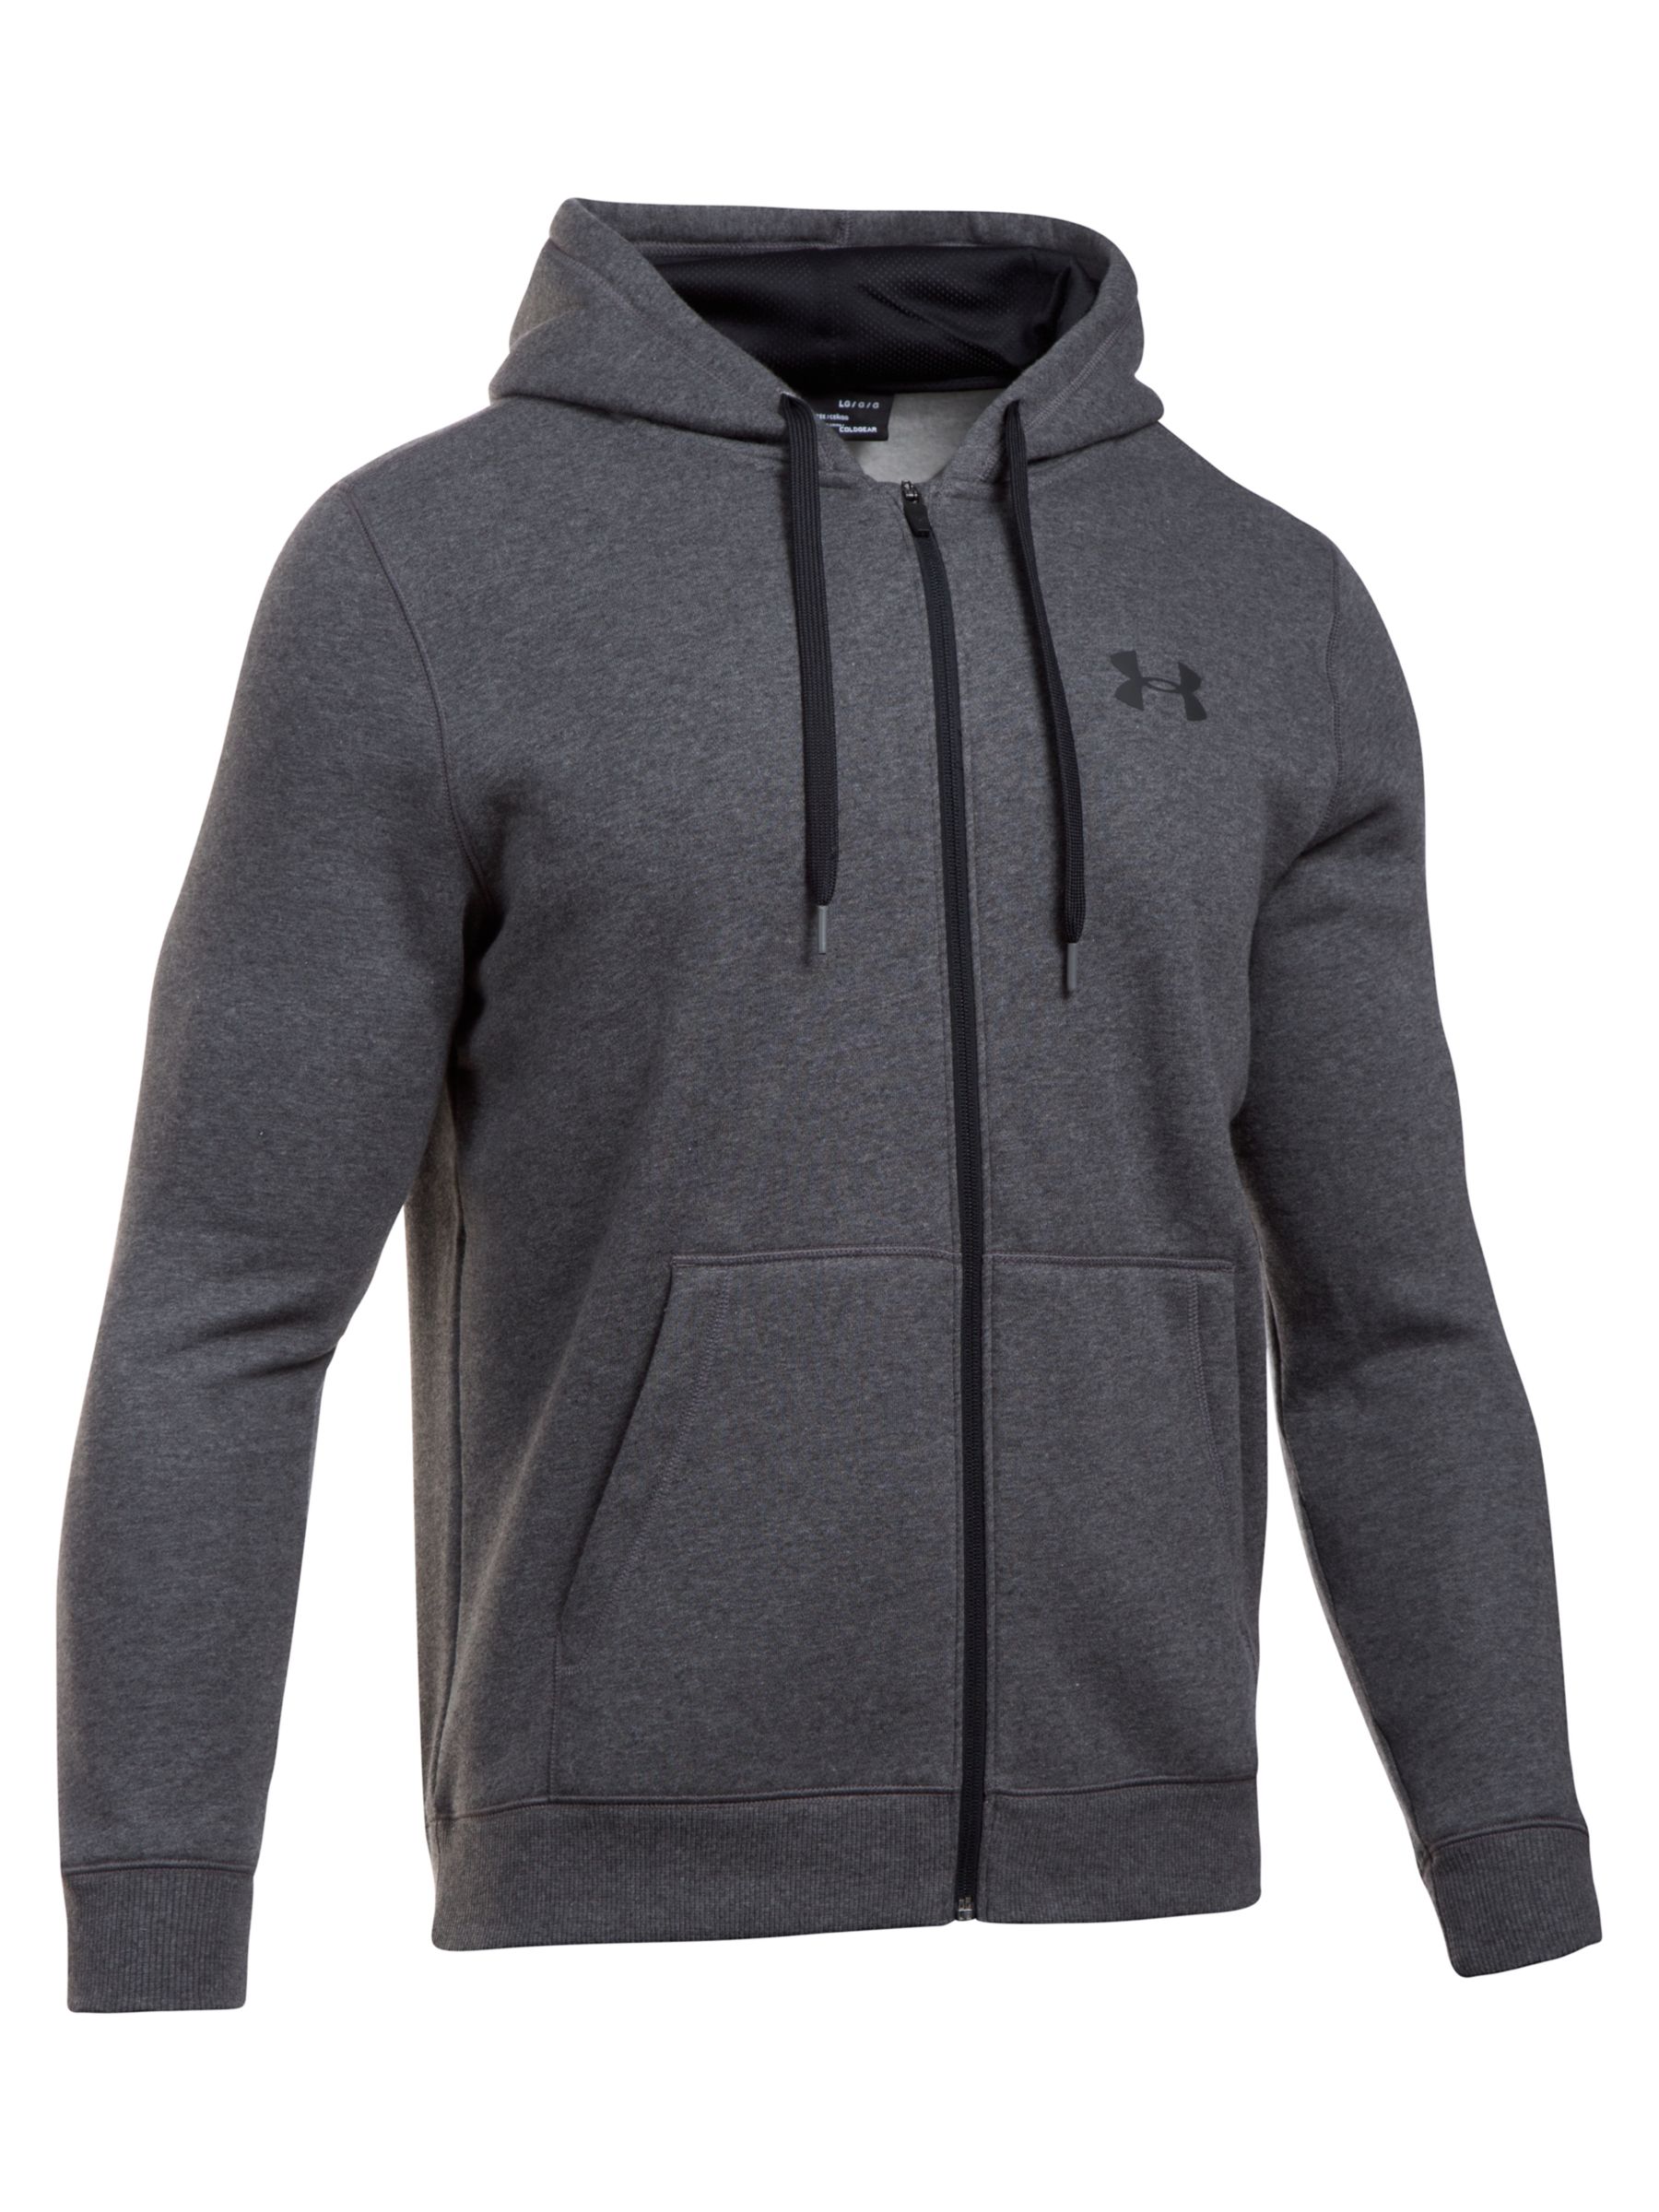 Under Armour Rival Fitted Graphic Hoodie, Grey